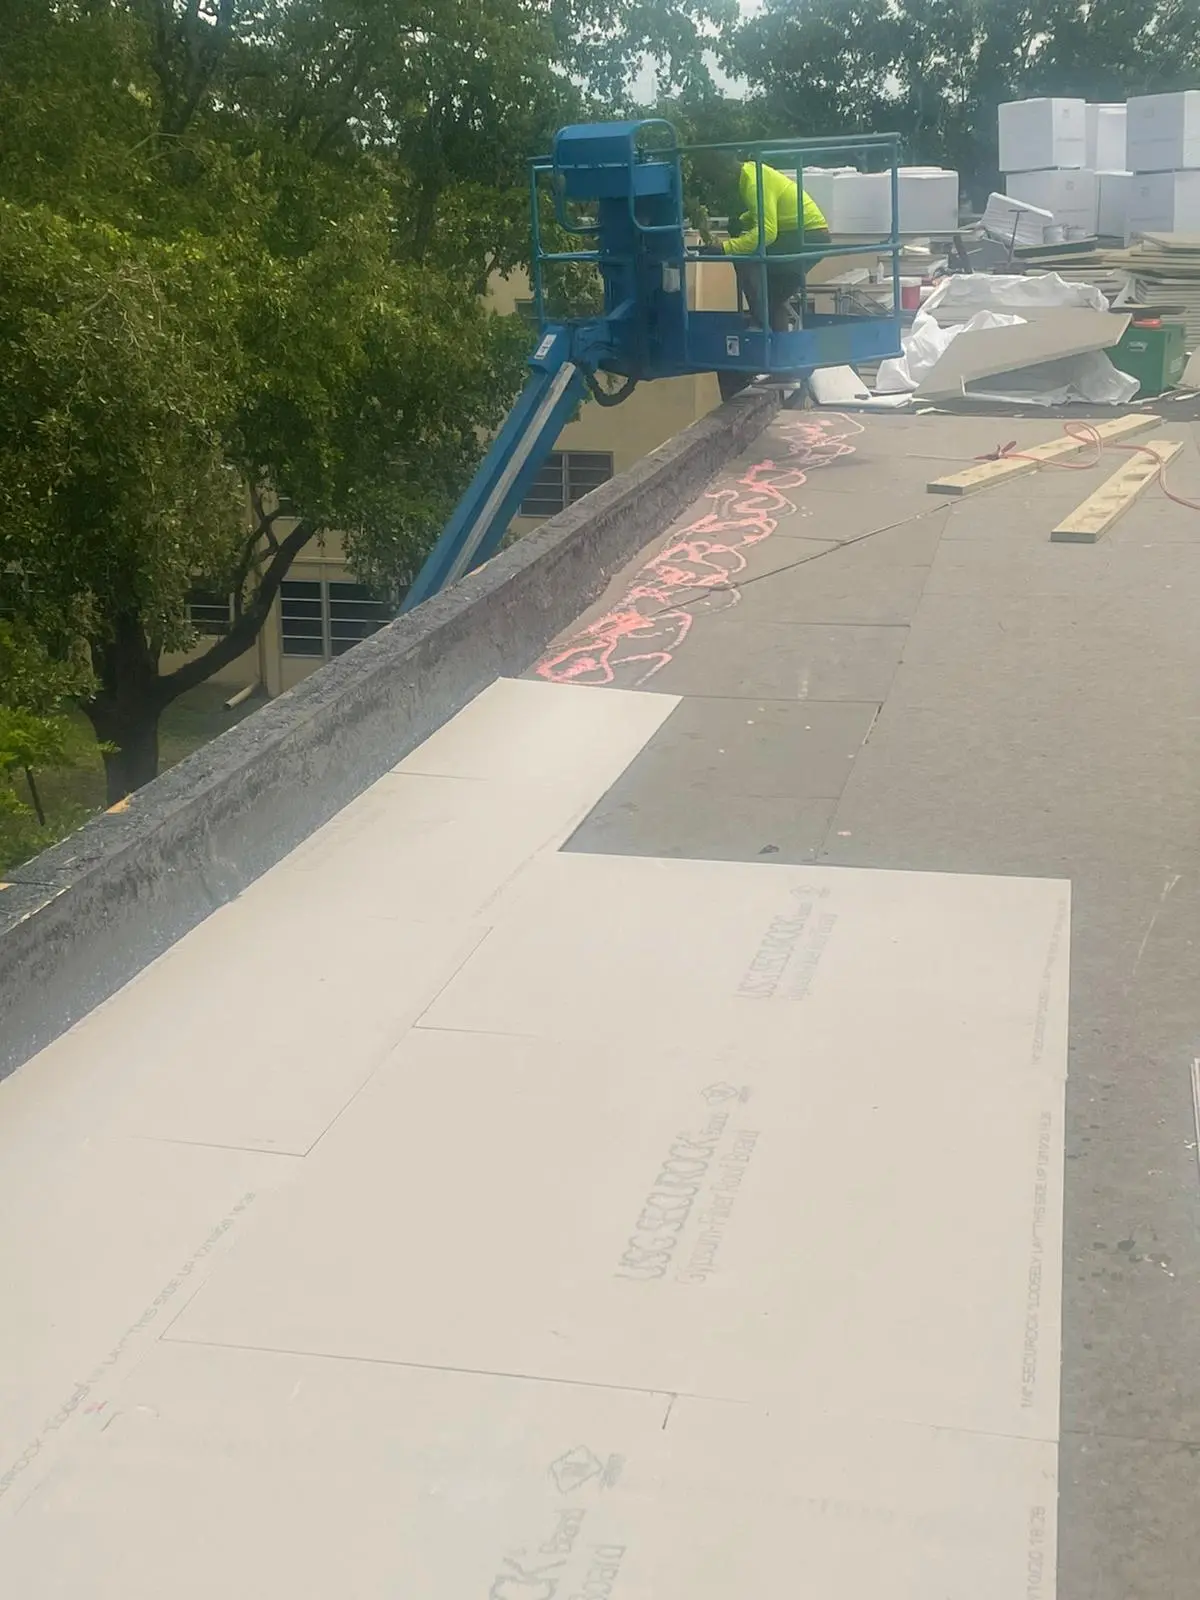 An in-progress roofing project showing insulation boards laid out on a flat roof with a boom lift in the background.